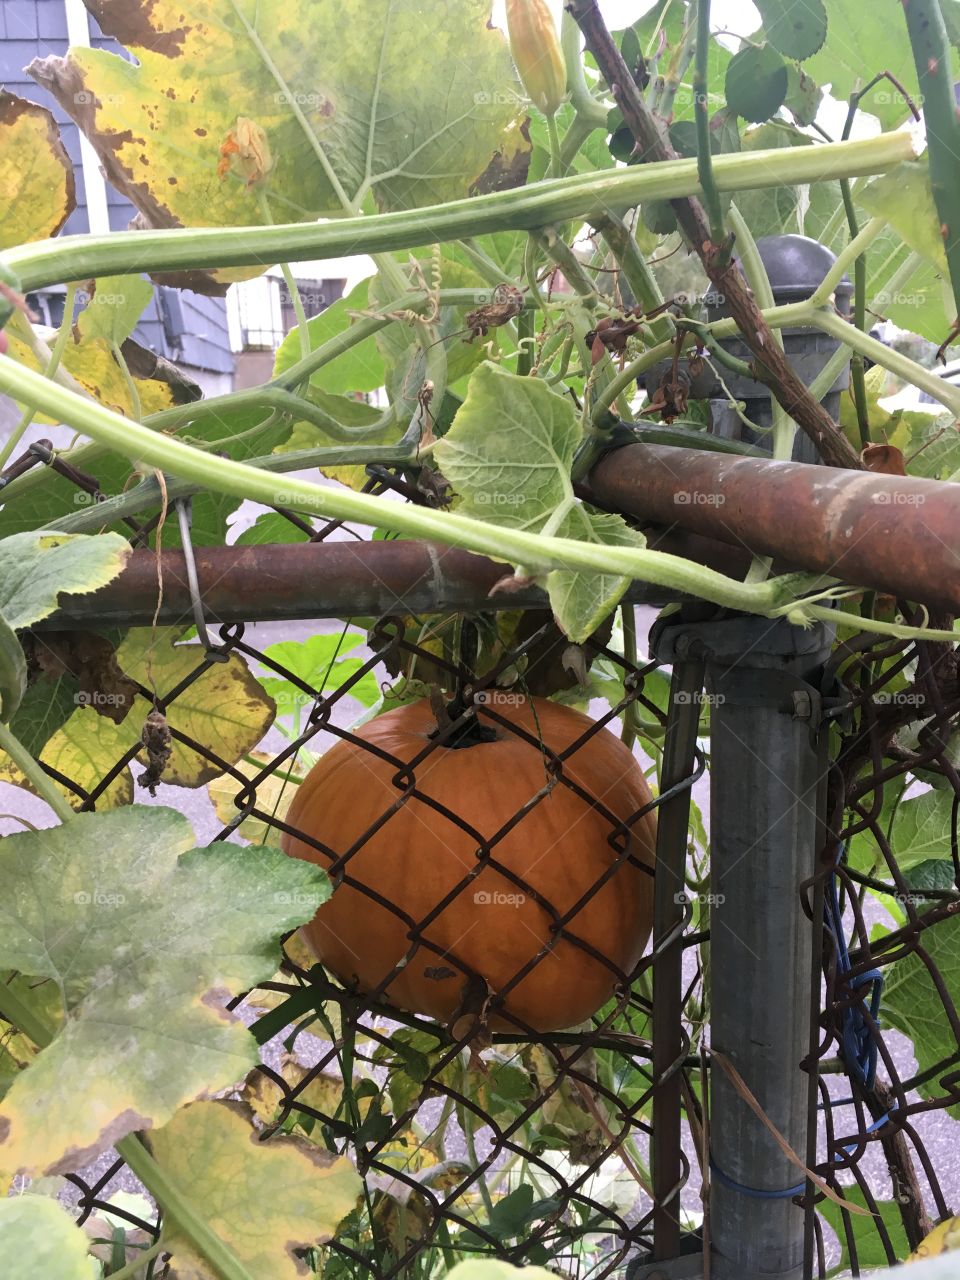 Fall harvest with pumpkins growing on the fence.